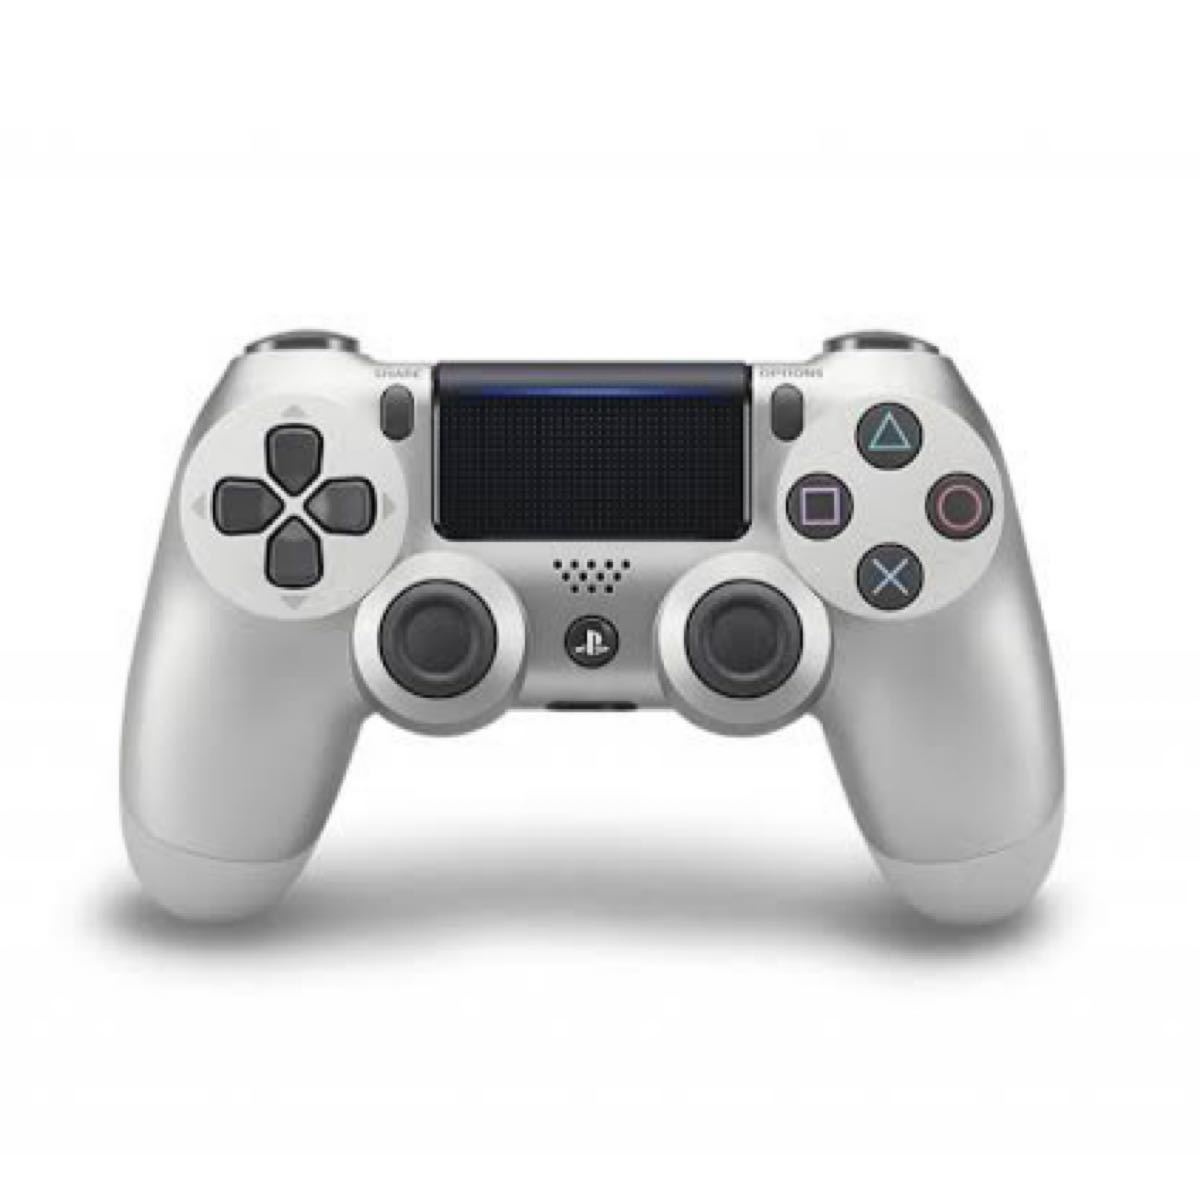 SONY PS4 ワイヤレス コントローラー (DUARSHOCK)